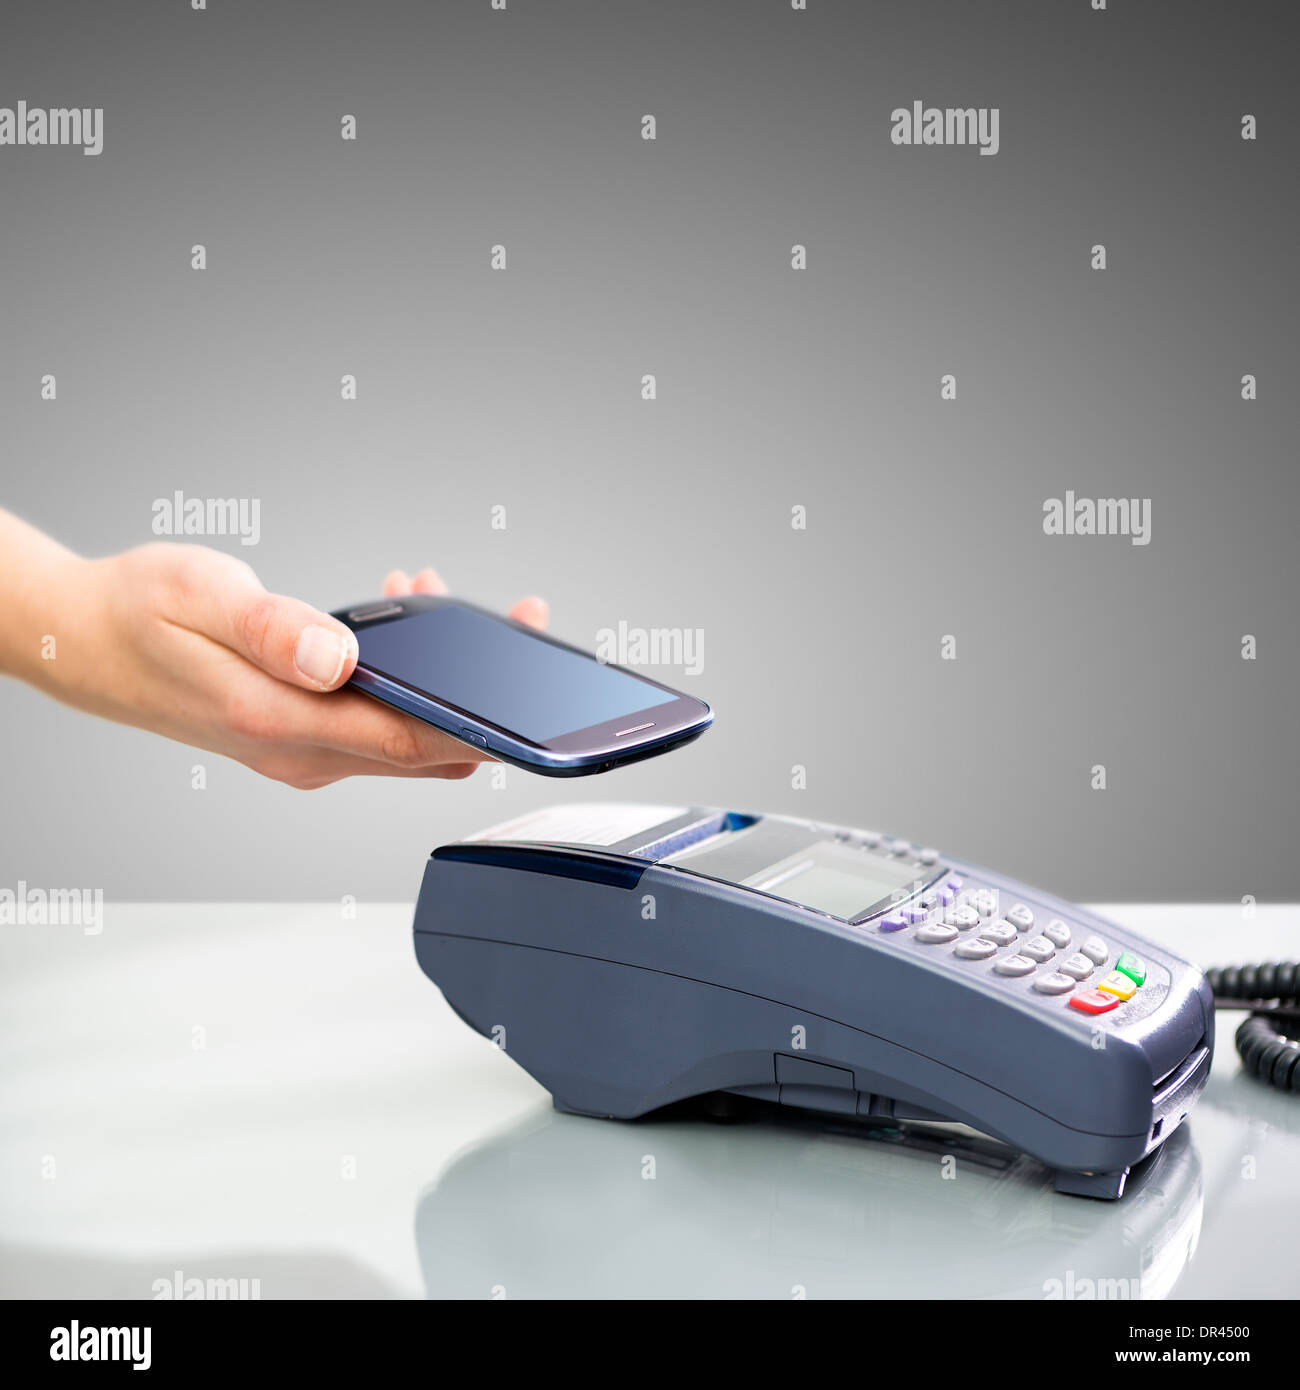 NFC - Near field communication, mobile payment Stock Photo